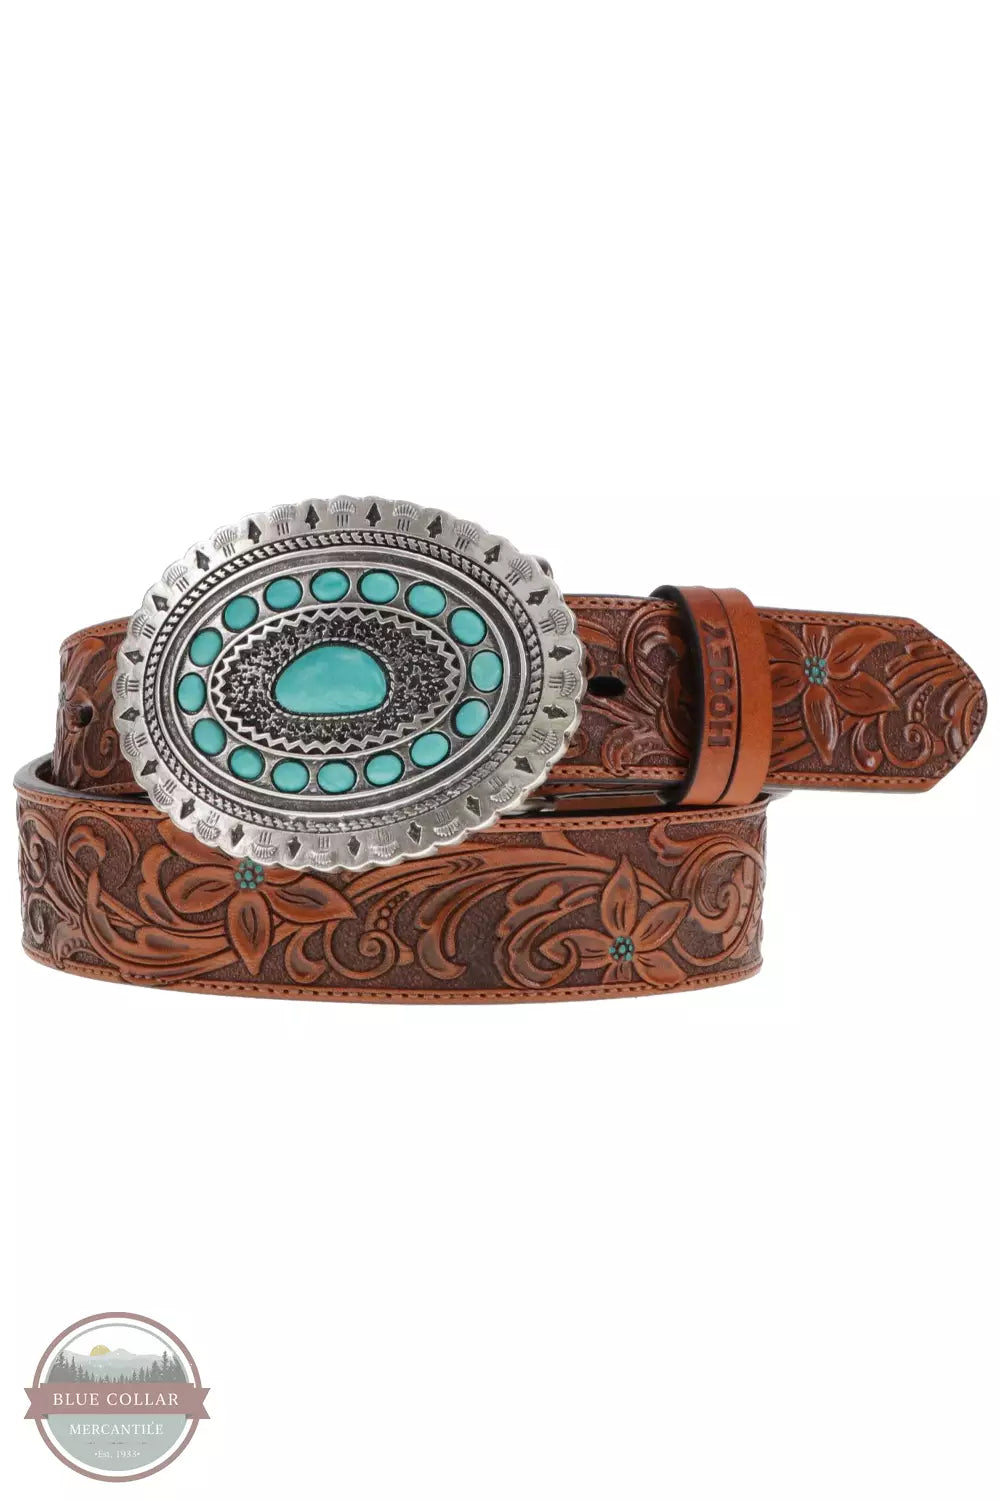 Hooey HWBLT021 Medina Floral Embossed Belt with Turquoise Buckle Front View